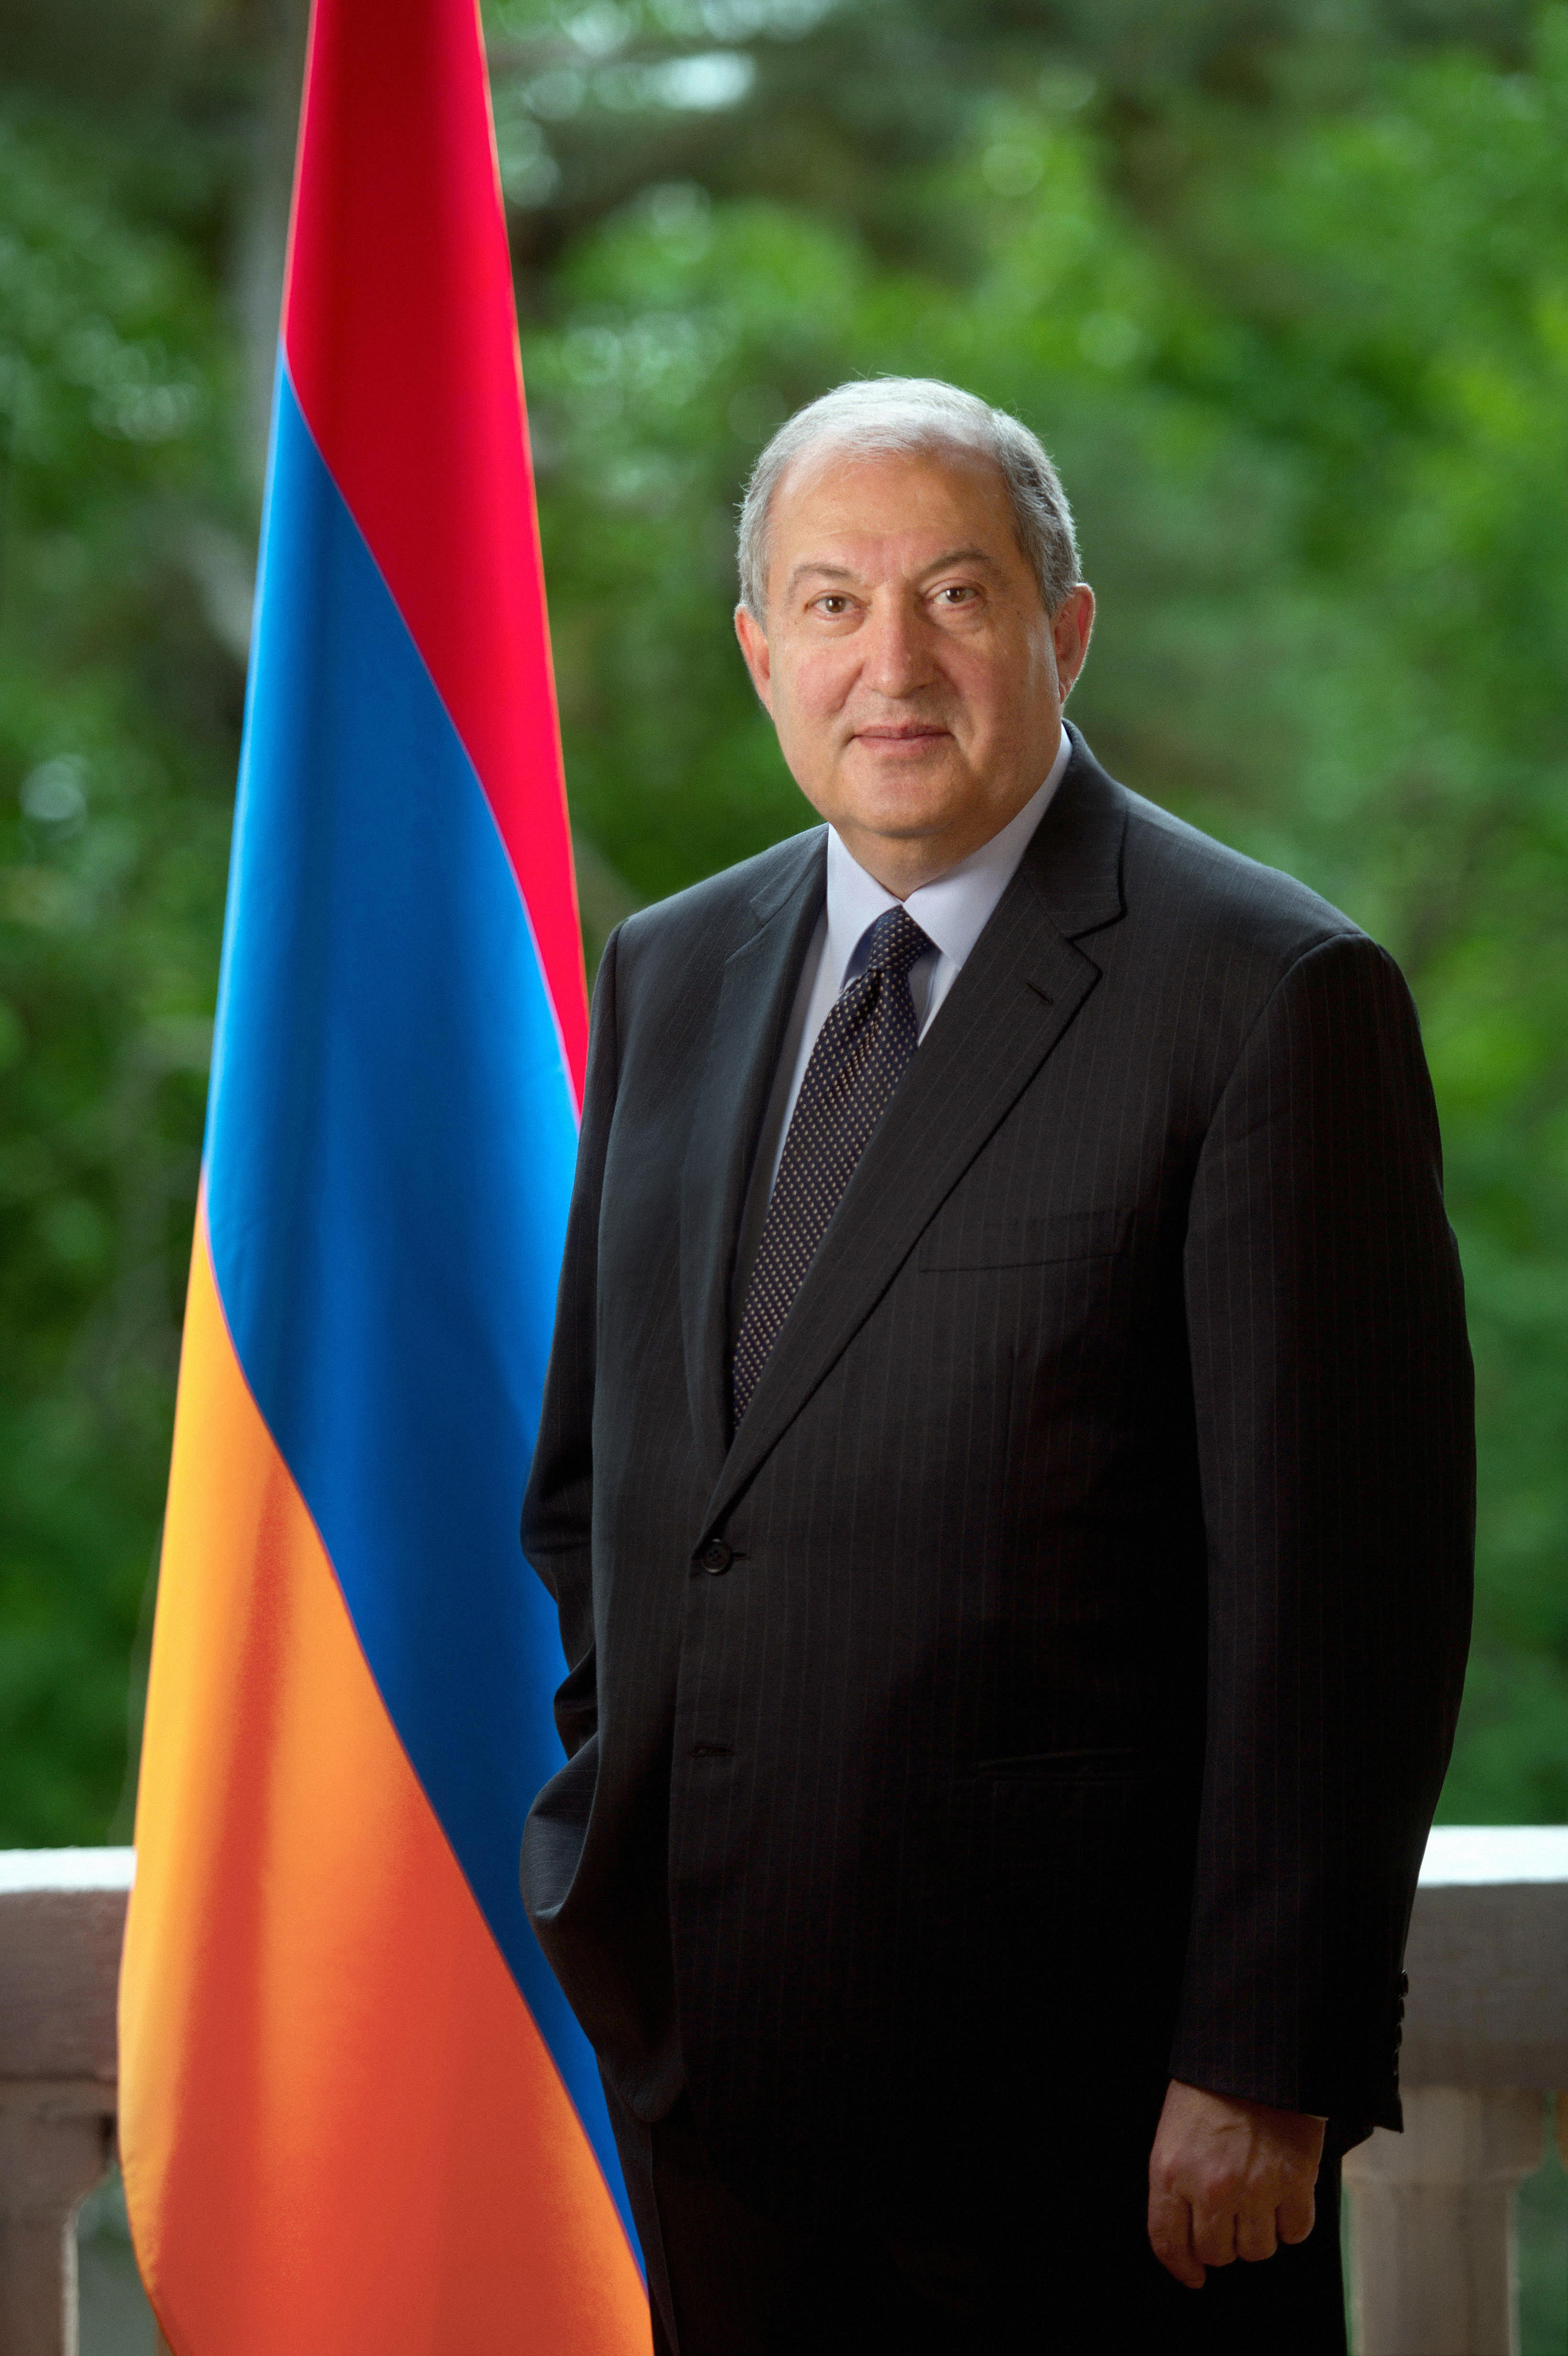 Armen Sarkissian: It is through our labor that we will ensure Armenia’s current and future development